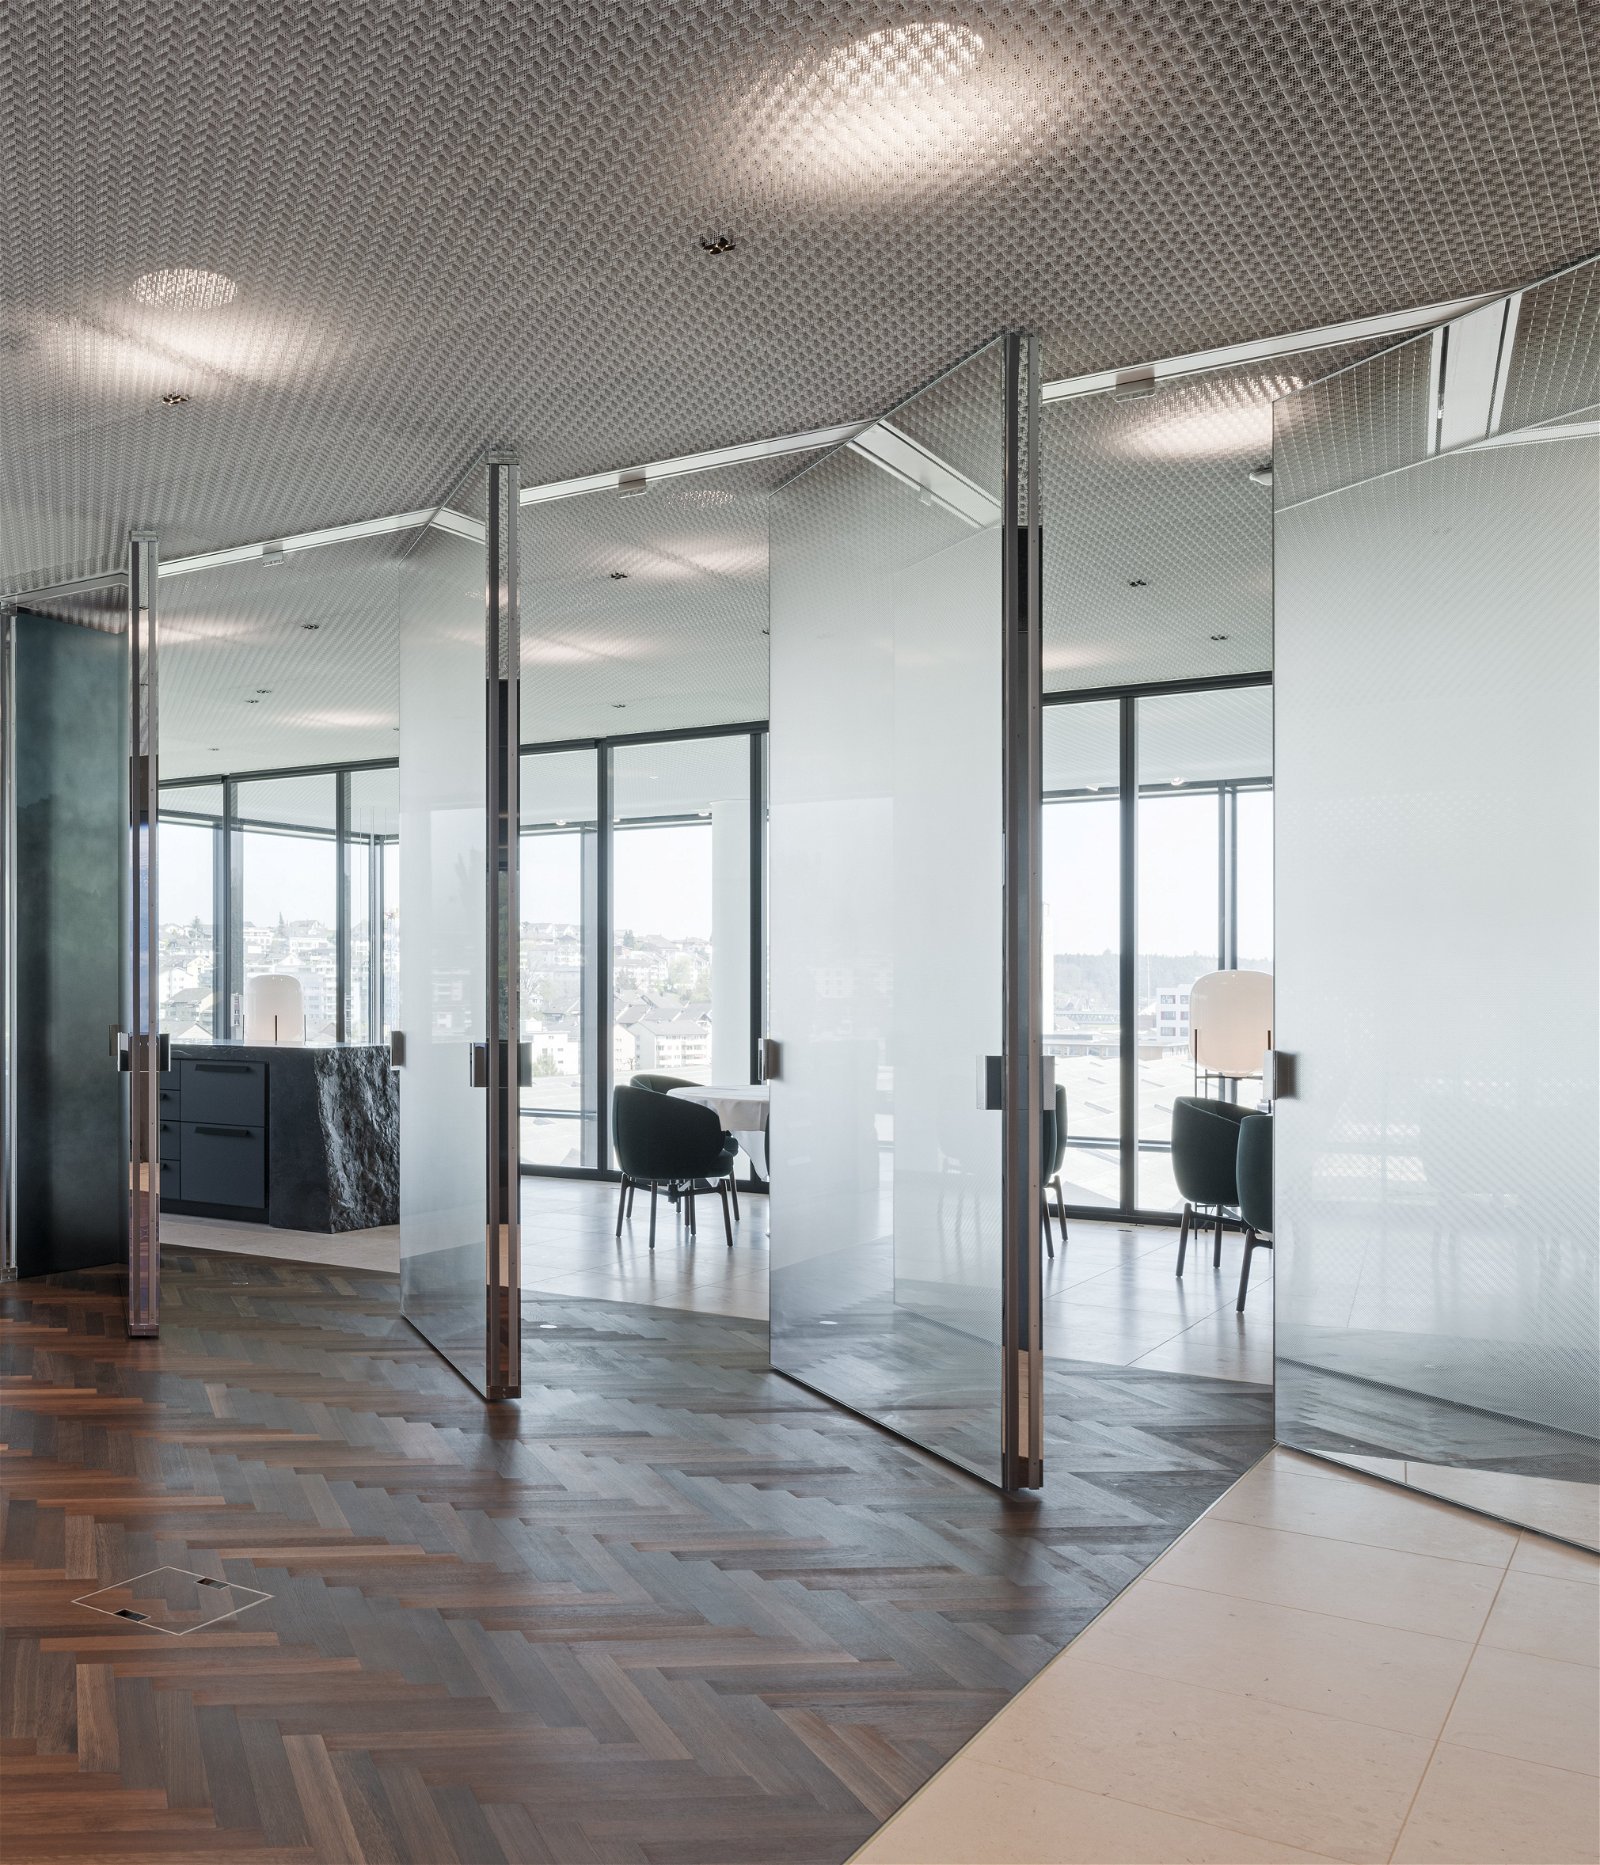 Pivoting glass wall - Designed by Kepenek GmbH. Manufacturered by Jos. Berchtold AG. Photographed by Beat Bühler